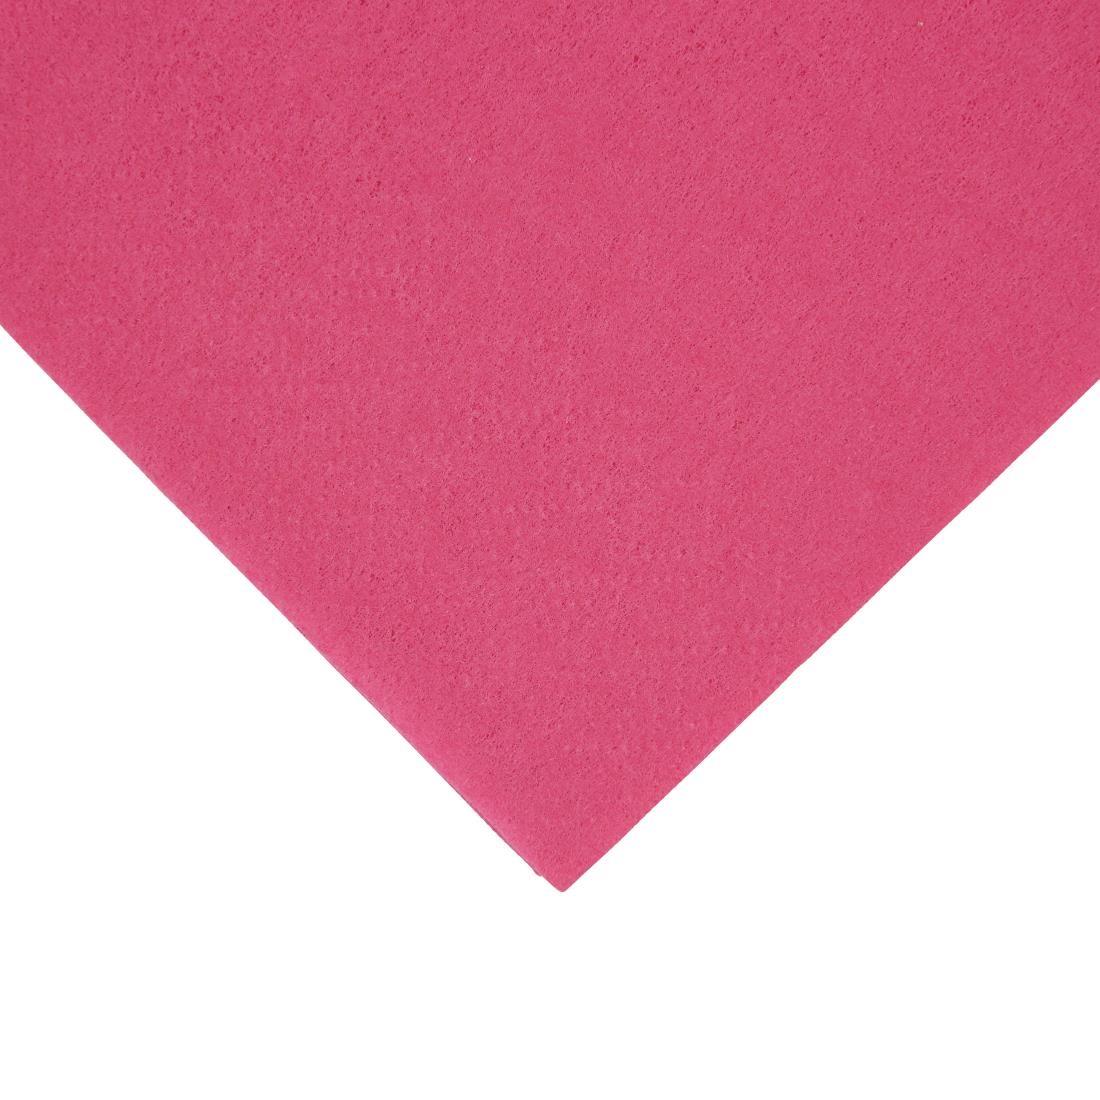 Fiesta Recyclable Premium Tablin Dinner Napkin Pink 40x40cm Airlaid 1/8 Fold (Pack of 500) - FE273  - 2